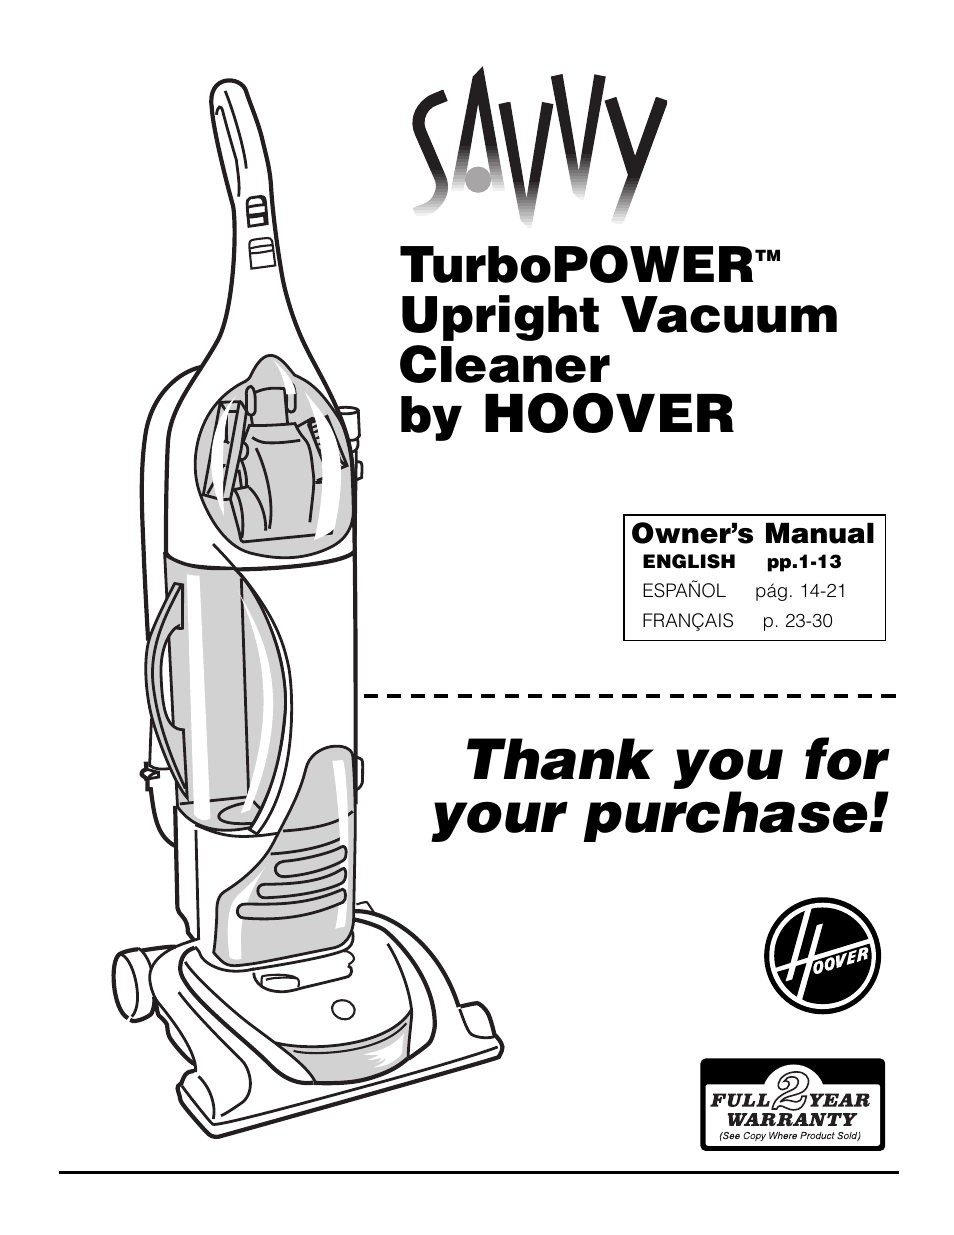 Hoover SAVVY Turbo POWER Upright Vacuum Cleaner User Manual | 13 pages